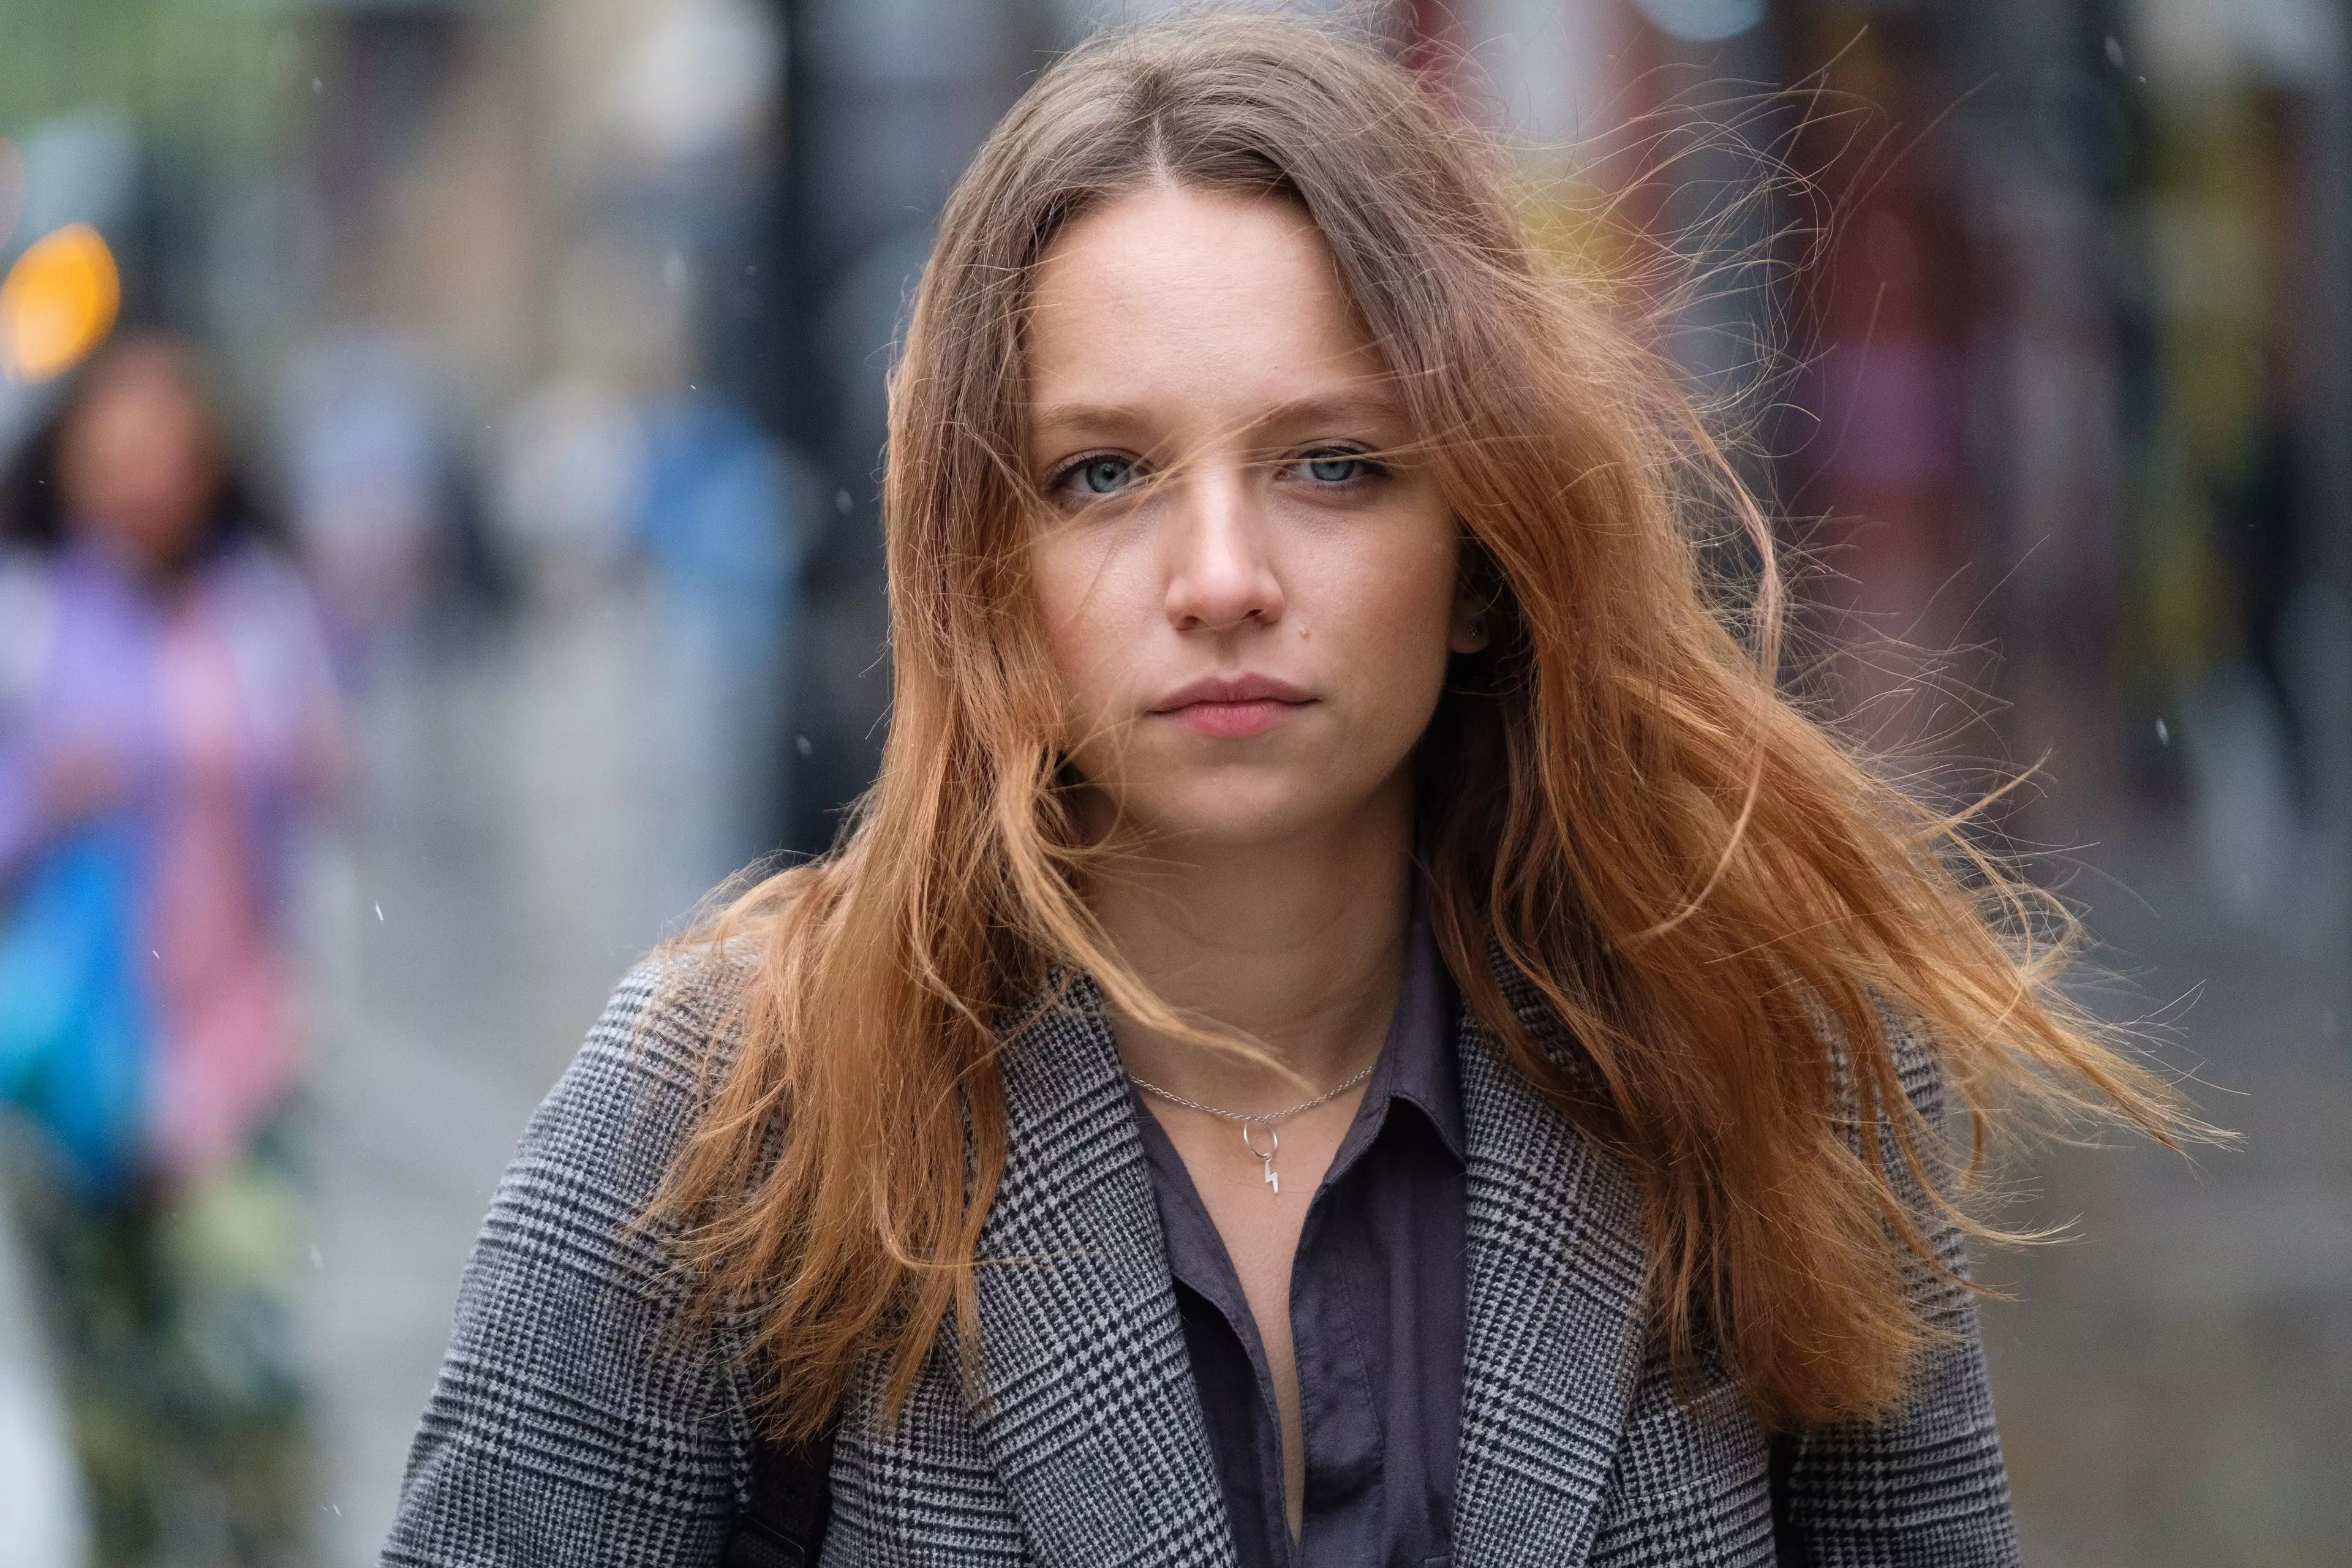 'Traces' stars Molly Windsor as lab assistant Emma Hedges. (